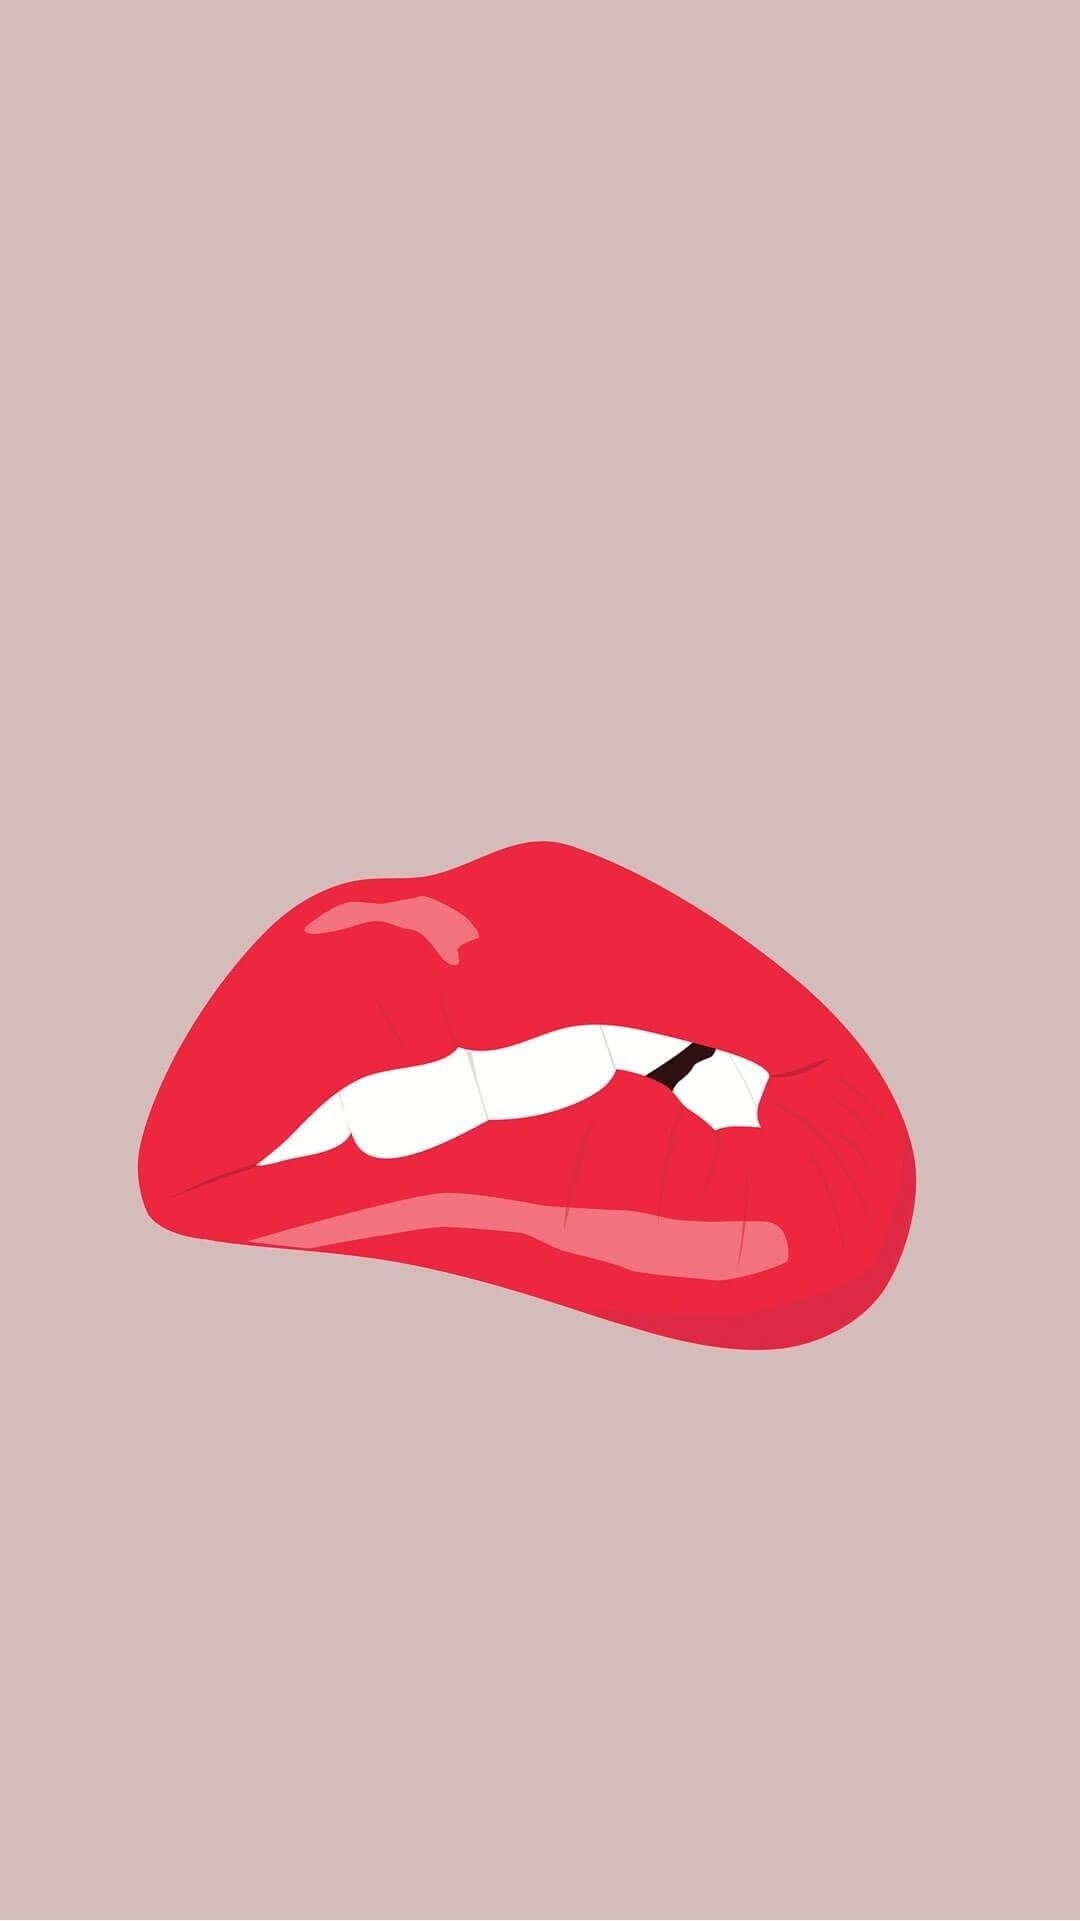 Girly: Red lips, Makeup, A bright lipstick, A staple of Parisian style. 1080x1930 HD Wallpaper.